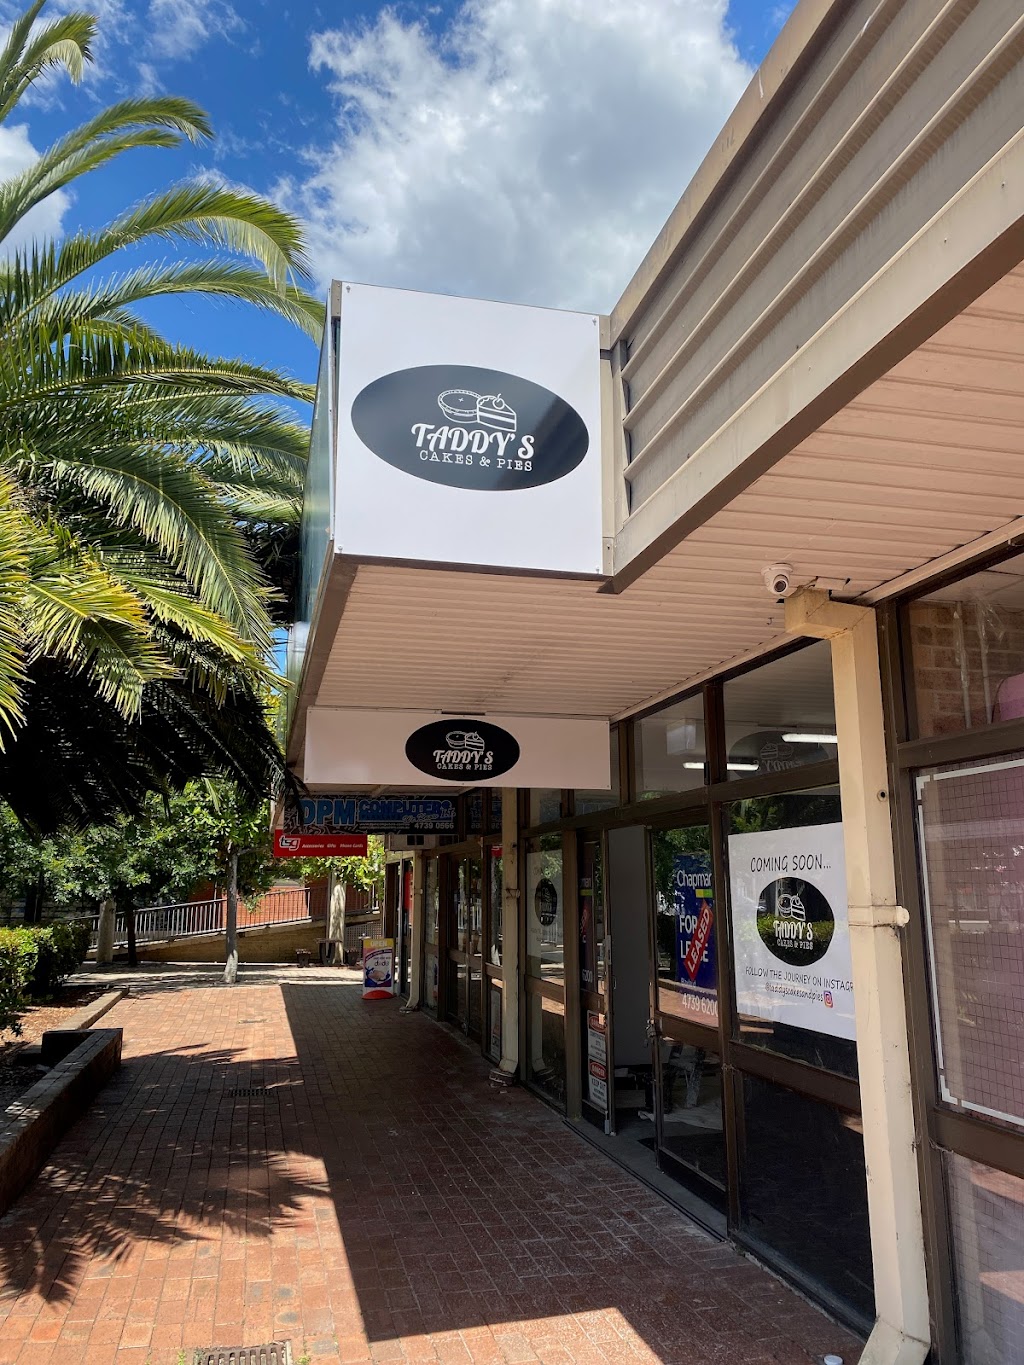 Taddys Cakes and Pies | bakery | 1 Station St, Blaxland NSW 2774, Australia | 0434648159 OR +61 434 648 159